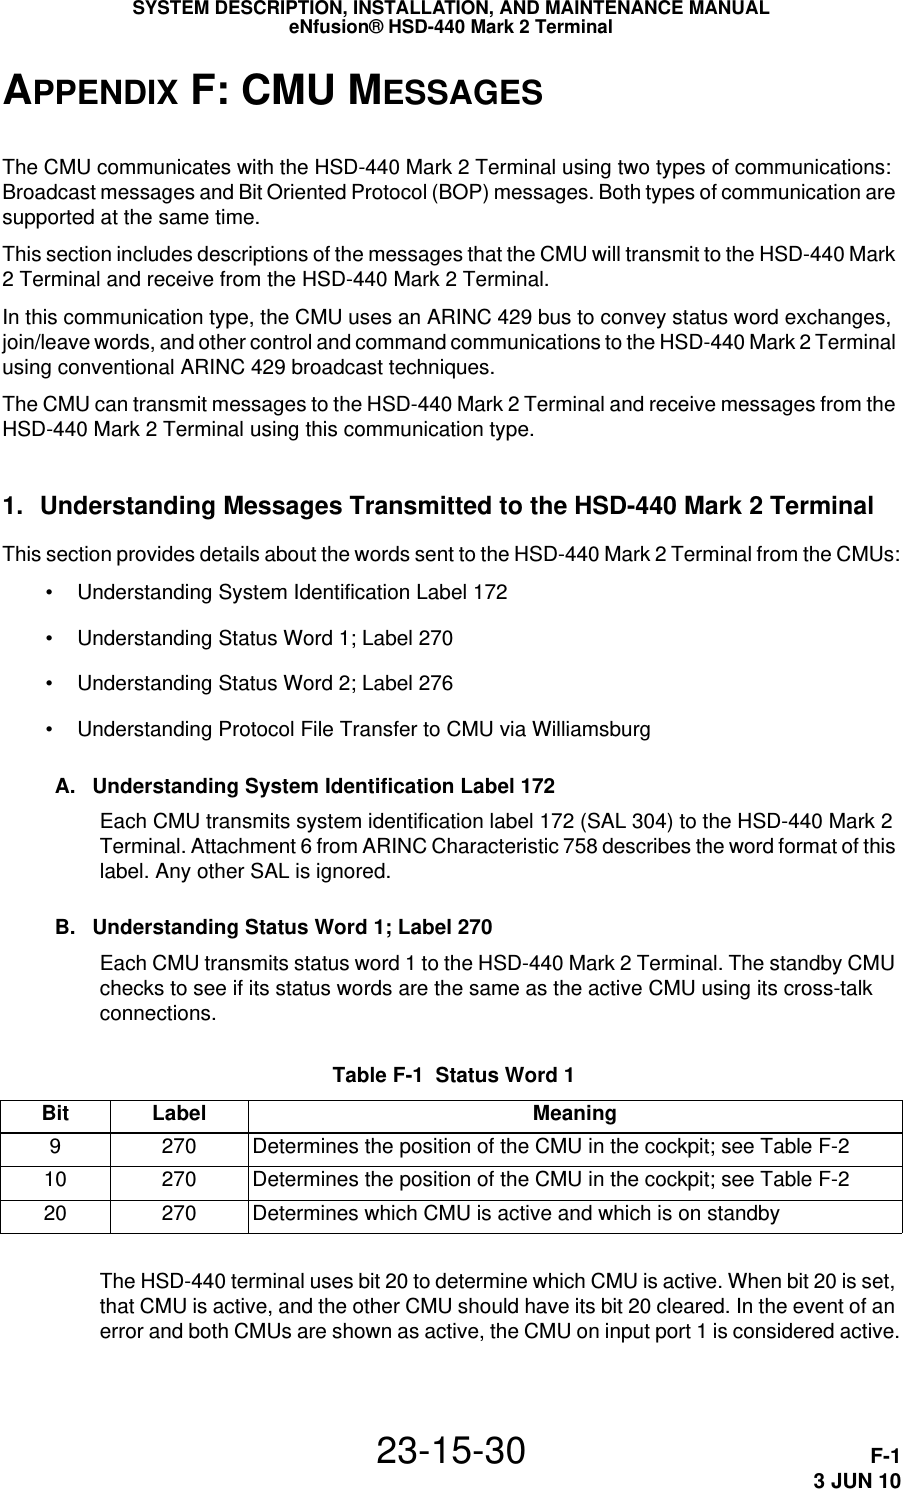 SYSTEM DESCRIPTION, INSTALLATION, AND MAINTENANCE MANUALeNfusion® HSD-440 Mark 2 Terminal23-15-30 F-13 JUN 10APPENDIX F: CMU MESSAGESThe CMU communicates with the HSD-440 Mark 2 Terminal using two types of communications: Broadcast messages and Bit Oriented Protocol (BOP) messages. Both types of communication are supported at the same time.This section includes descriptions of the messages that the CMU will transmit to the HSD-440 Mark 2 Terminal and receive from the HSD-440 Mark 2 Terminal.In this communication type, the CMU uses an ARINC 429 bus to convey status word exchanges, join/leave words, and other control and command communications to the HSD-440 Mark 2 Terminal using conventional ARINC 429 broadcast techniques.The CMU can transmit messages to the HSD-440 Mark 2 Terminal and receive messages from the HSD-440 Mark 2 Terminal using this communication type.1. Understanding Messages Transmitted to the HSD-440 Mark 2 TerminalThis section provides details about the words sent to the HSD-440 Mark 2 Terminal from the CMUs: • Understanding System Identification Label 172 • Understanding Status Word 1; Label 270 • Understanding Status Word 2; Label 276 • Understanding Protocol File Transfer to CMU via WilliamsburgA. Understanding System Identification Label 172Each CMU transmits system identification label 172 (SAL 304) to the HSD-440 Mark 2 Terminal. Attachment 6 from ARINC Characteristic 758 describes the word format of this label. Any other SAL is ignored.B. Understanding Status Word 1; Label 270Each CMU transmits status word 1 to the HSD-440 Mark 2 Terminal. The standby CMU checks to see if its status words are the same as the active CMU using its cross-talk connections.The HSD-440 terminal uses bit 20 to determine which CMU is active. When bit 20 is set, that CMU is active, and the other CMU should have its bit 20 cleared. In the event of an error and both CMUs are shown as active, the CMU on input port 1 is considered active. Table F-1  Status Word 1 Bit Label Meaning9270 Determines the position of the CMU in the cockpit; see Table F-210 270 Determines the position of the CMU in the cockpit; see Table F-220 270 Determines which CMU is active and which is on standby